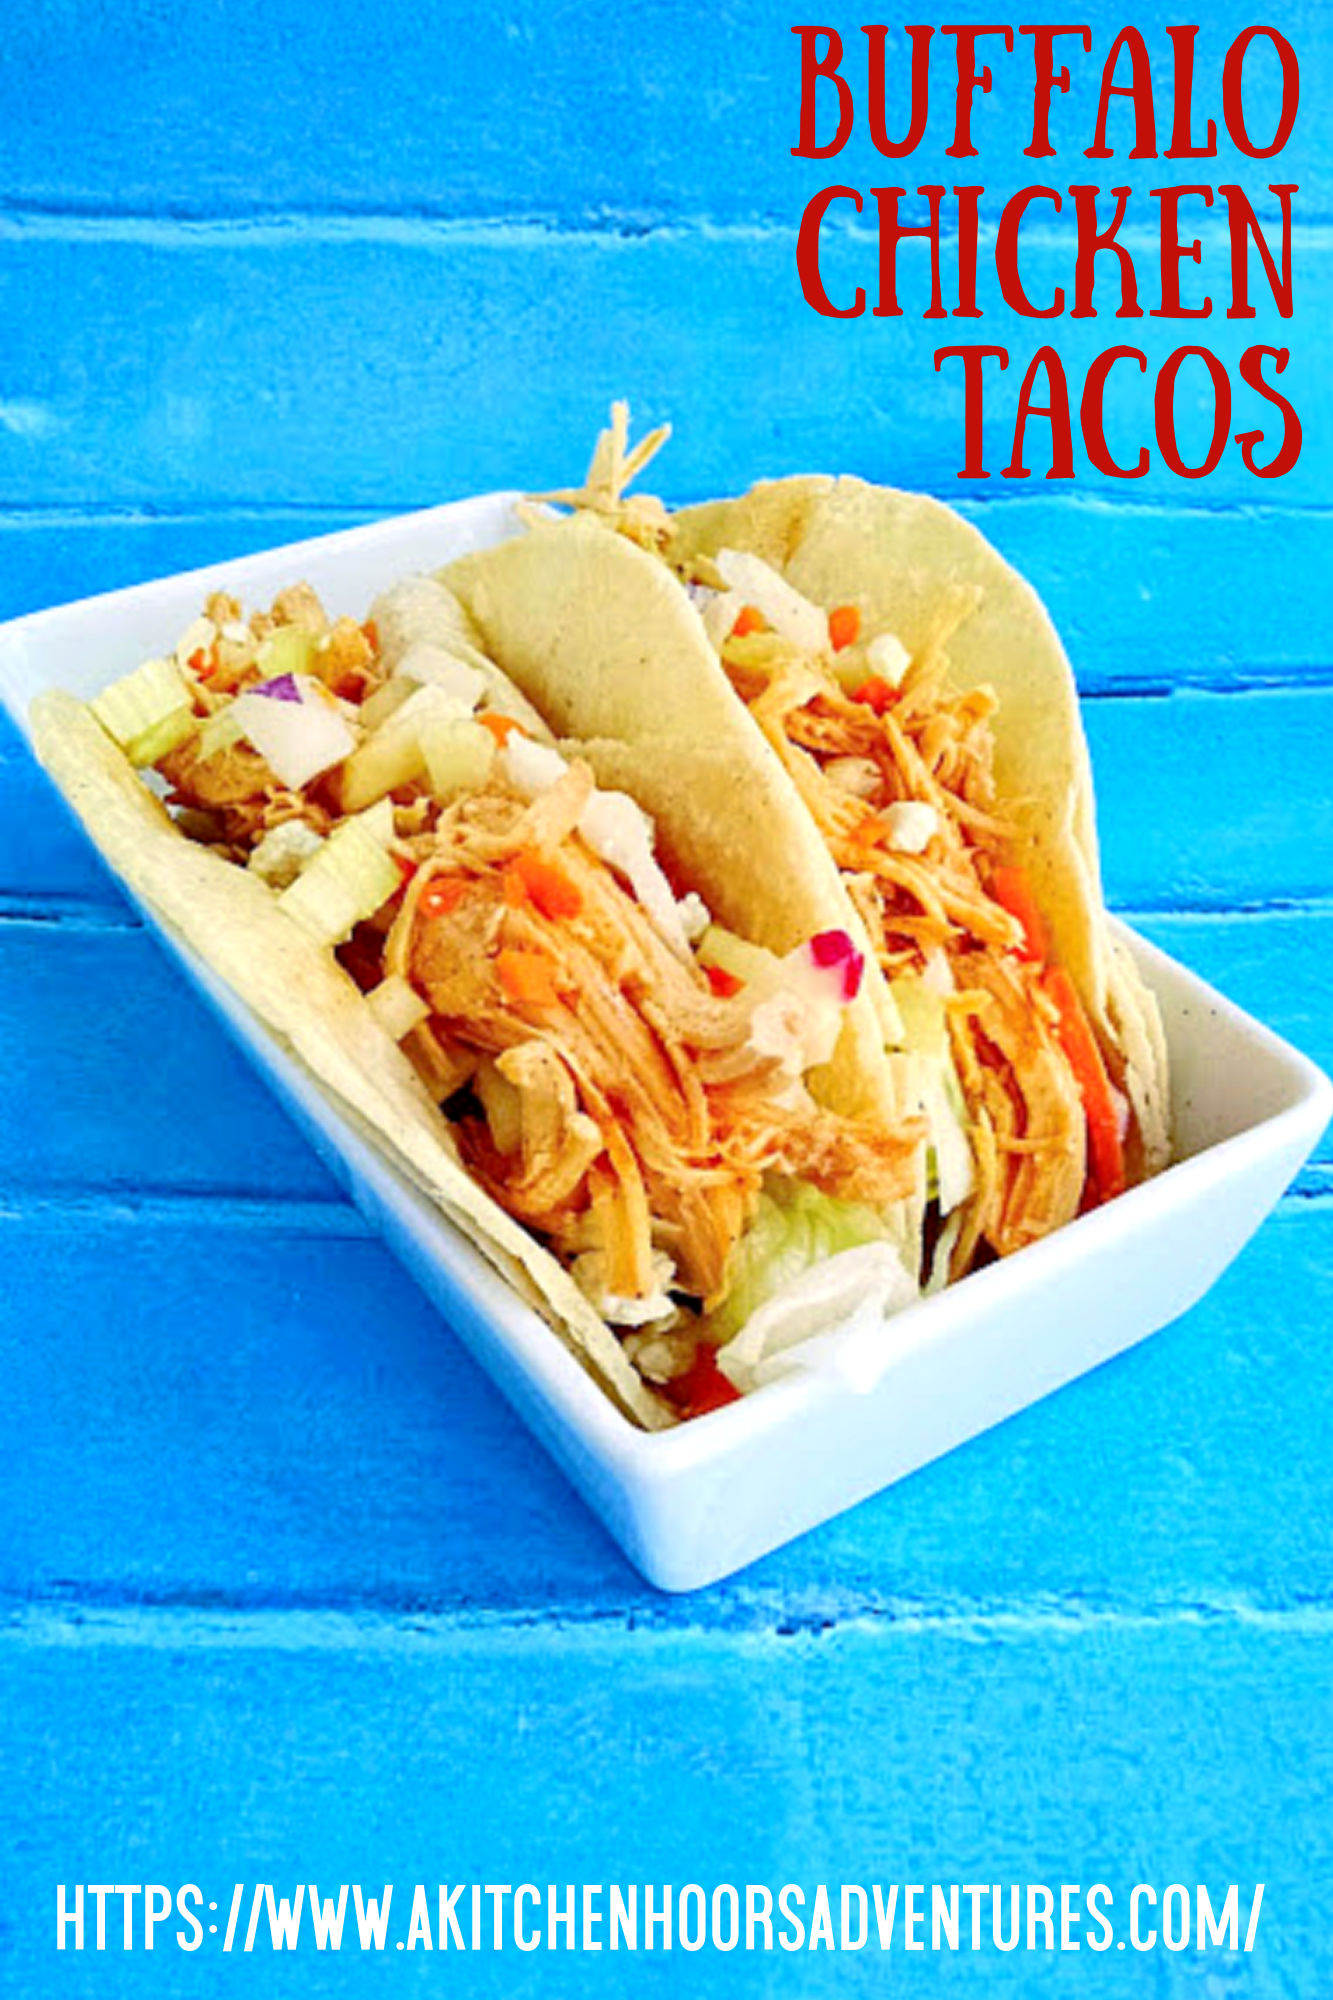 These Buffalo Chicken Tacos with Blue Cheese Radish Slaw will knock your taste buds off!  And your family will want these ALL time.  Don't say I didn't warn you! #OurFamilyTable